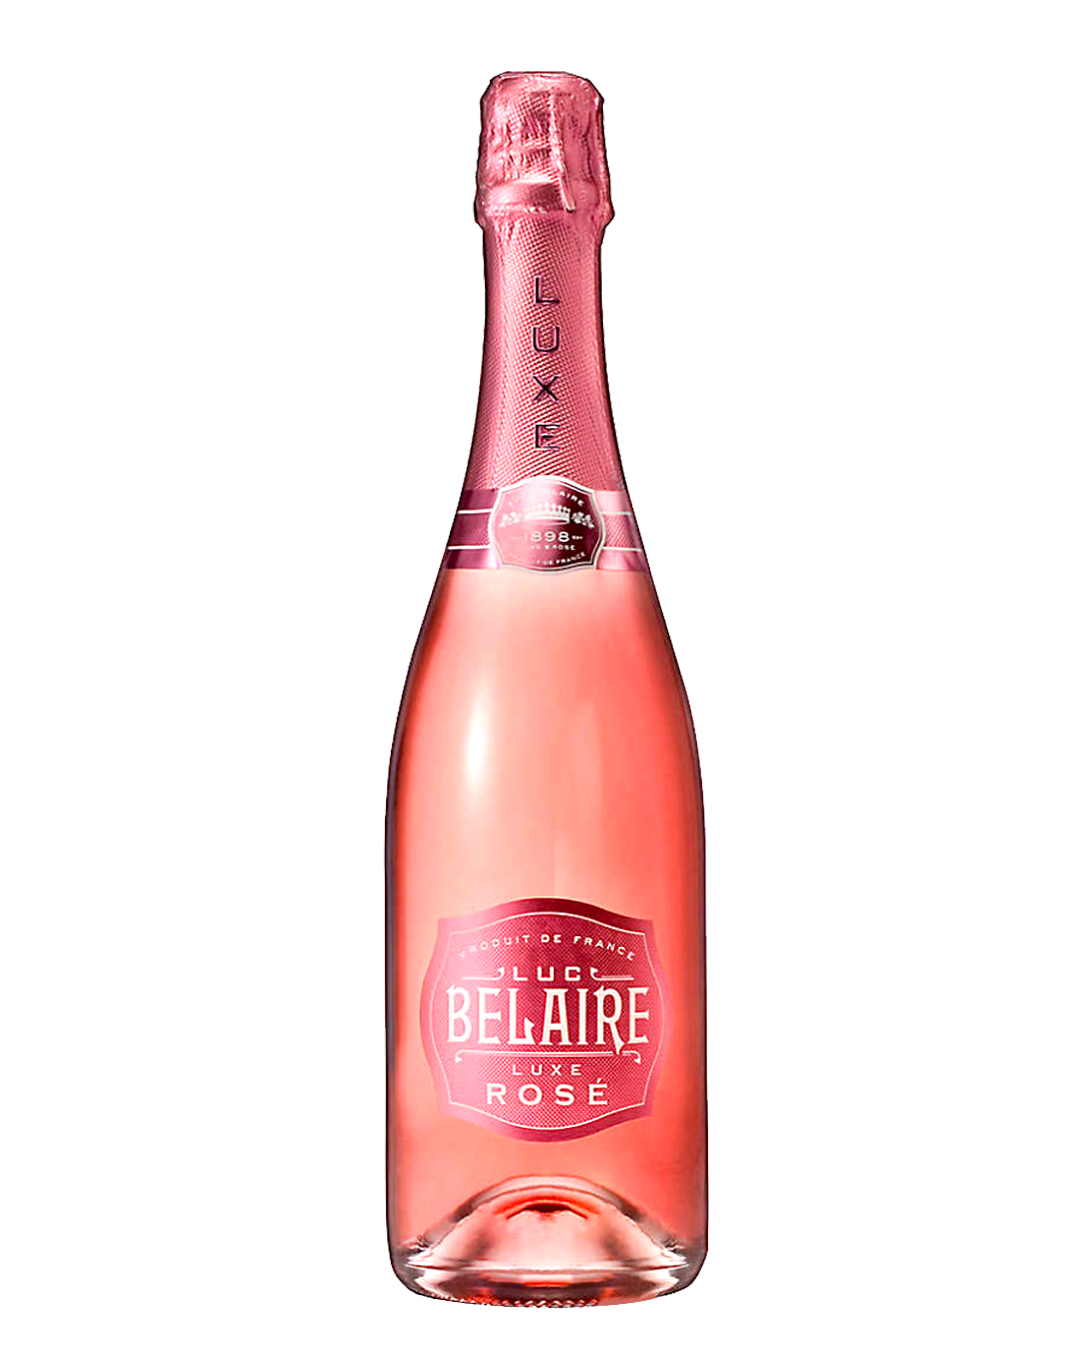 Belaire_Luxe_Rose_Champagne